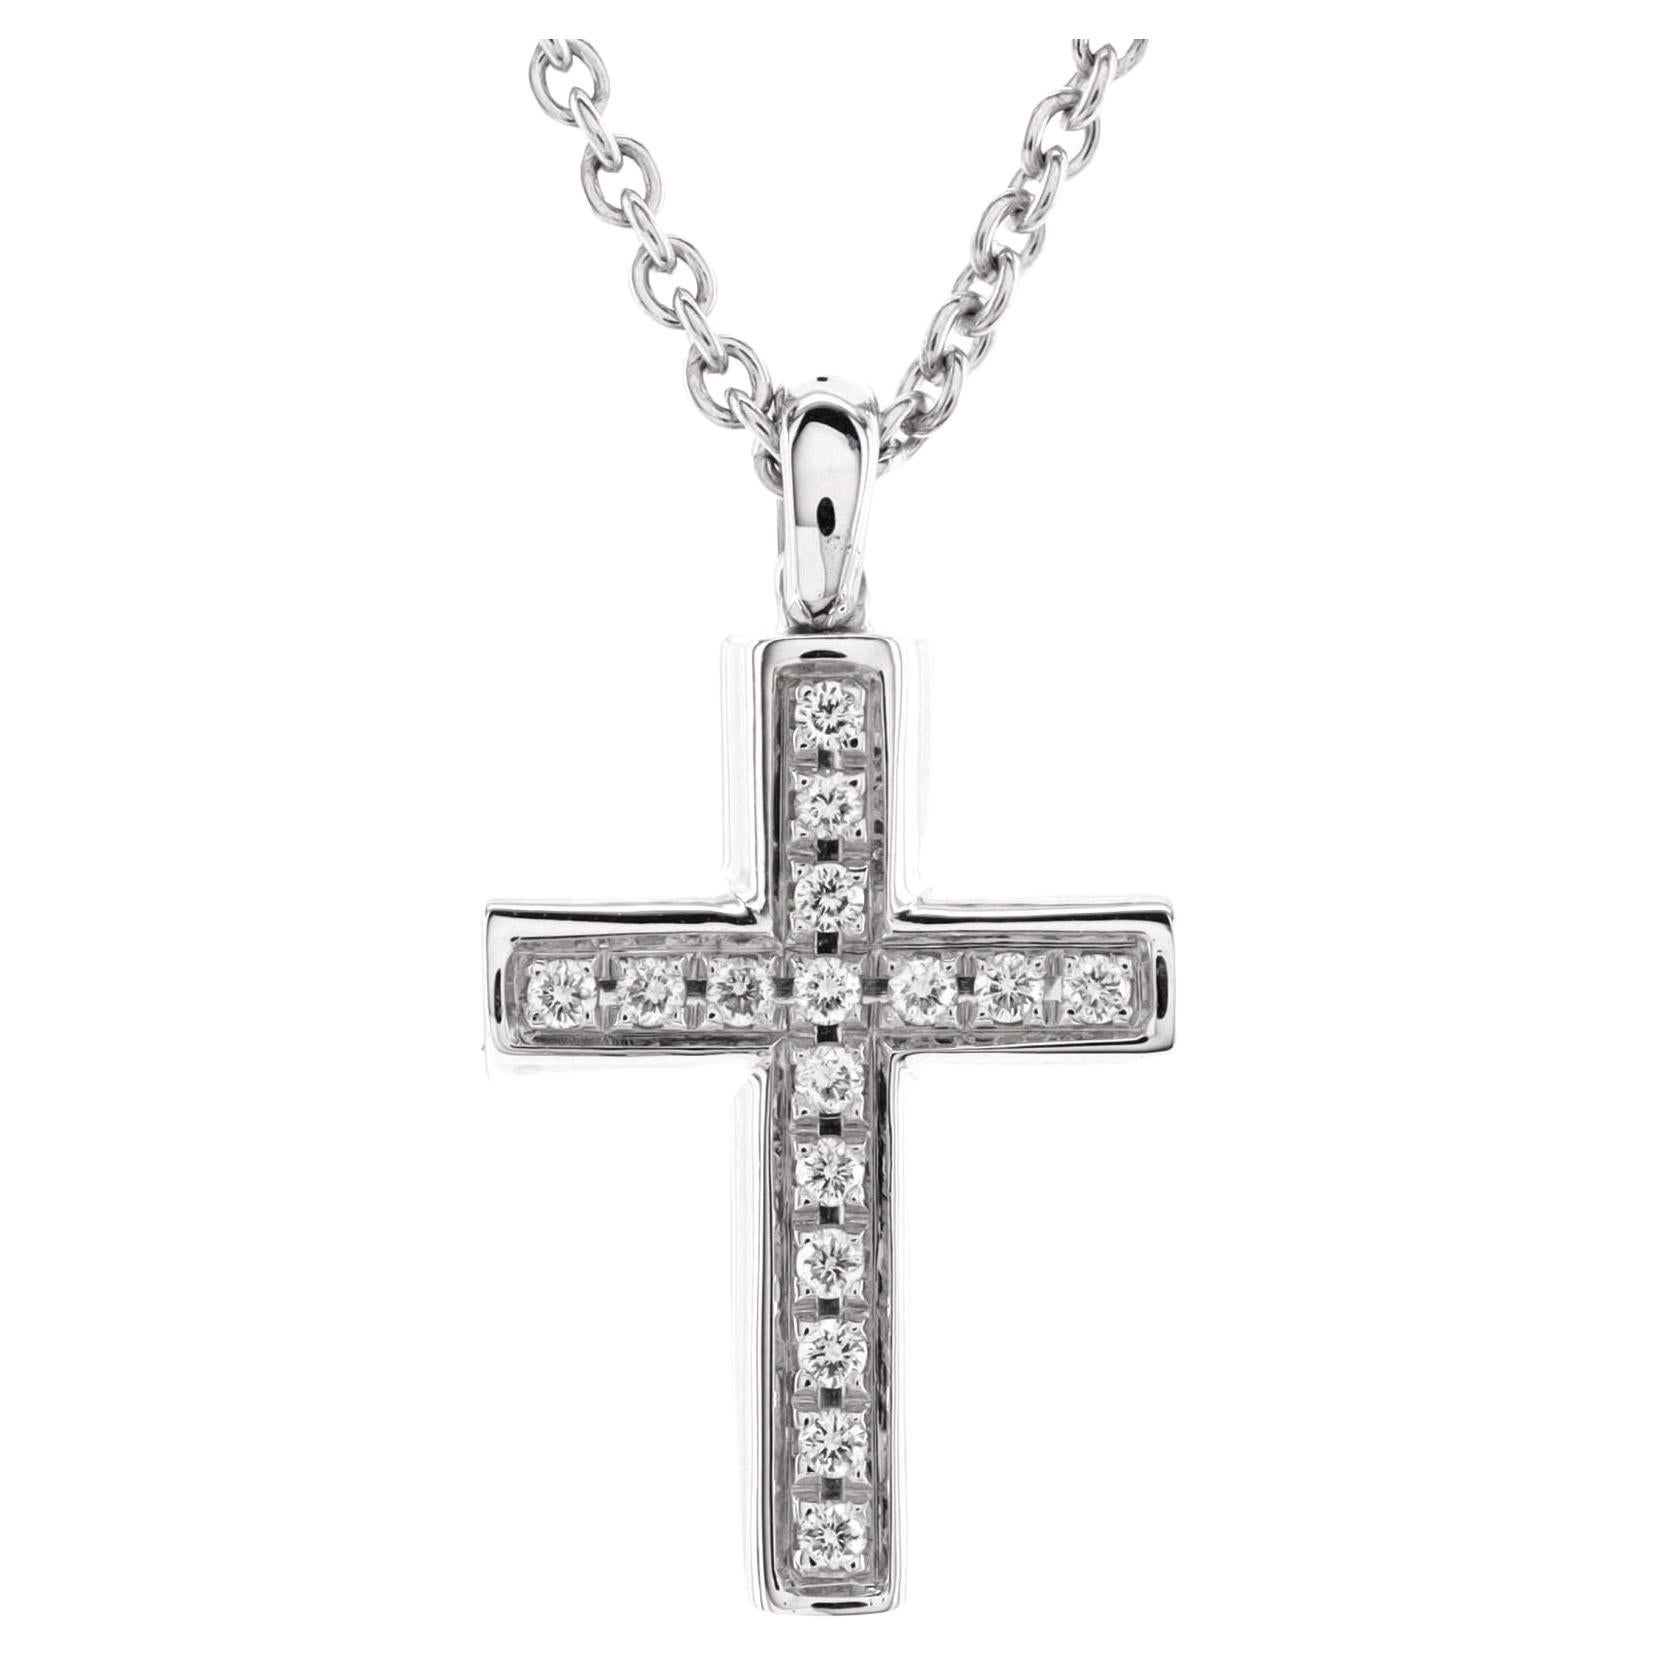 Bvlgari Latin Cross Necklace 18K White Gold and Diamonds For Sale